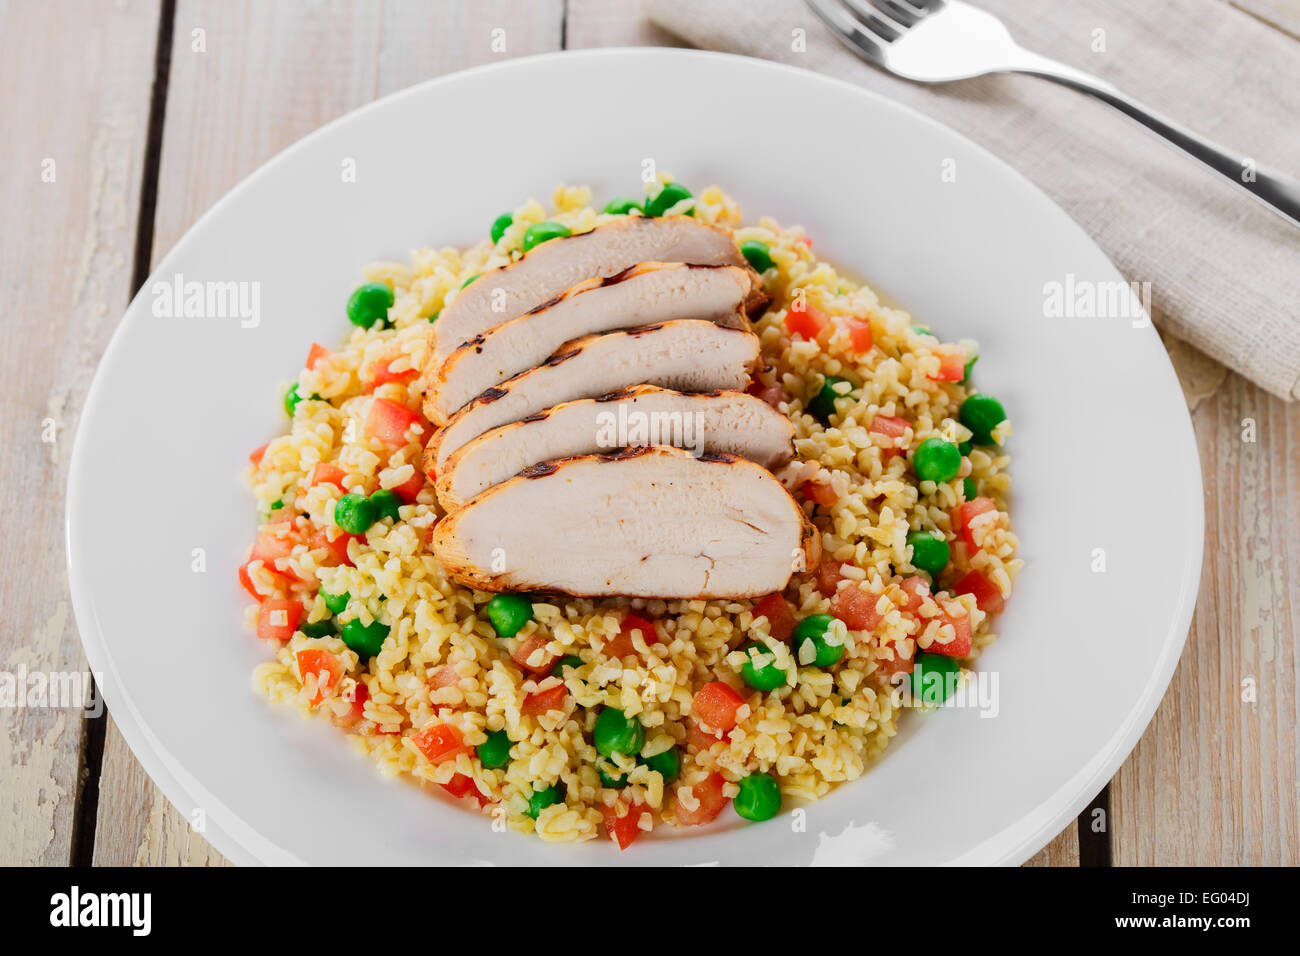 couscous with green peas and chicken fillet grill Stock Photo